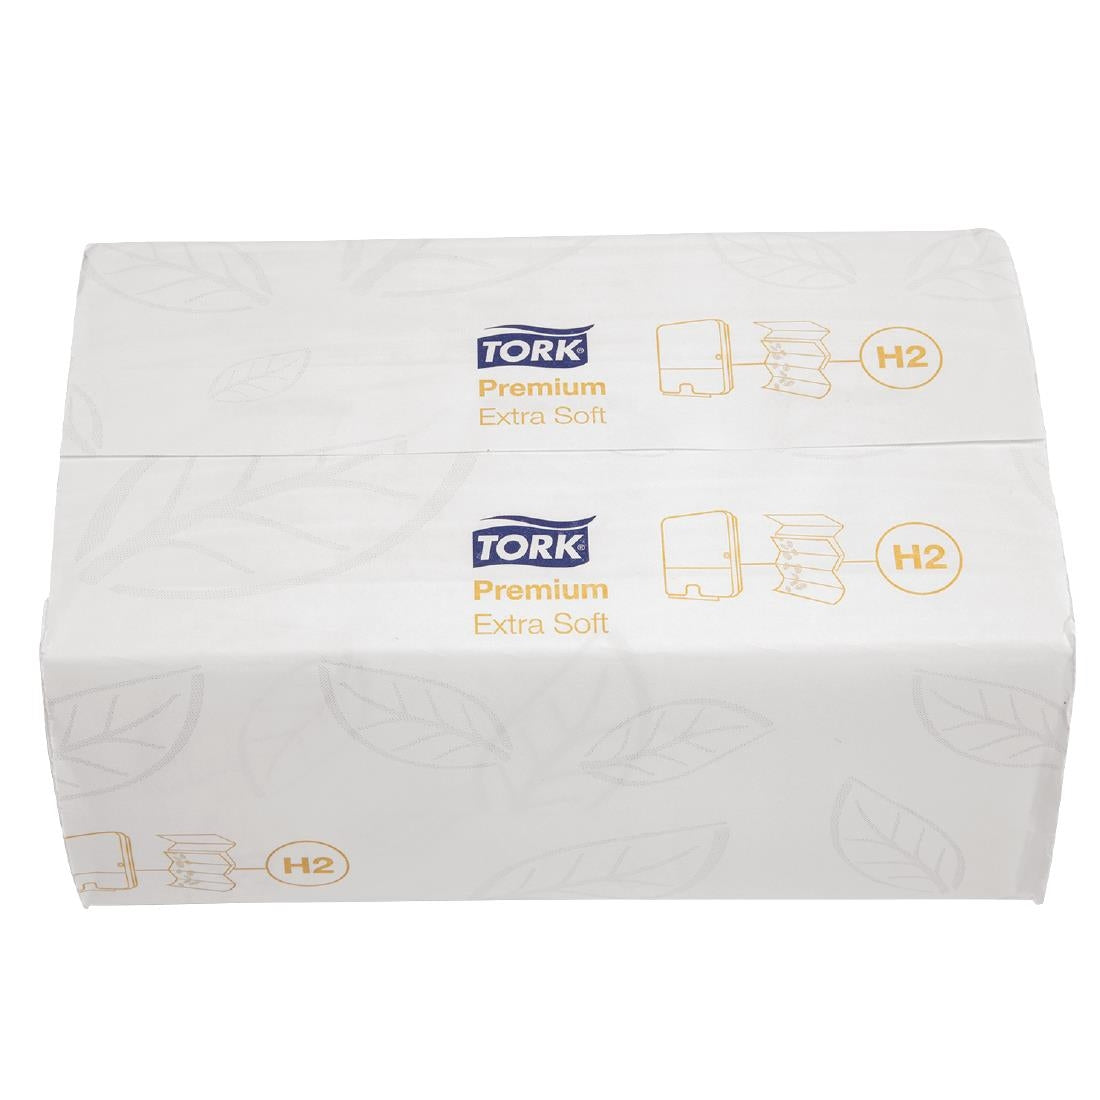 Tork Xpress Extra-Soft Multi-Fold Hand Towels 2-Ply (Pack of 2100)